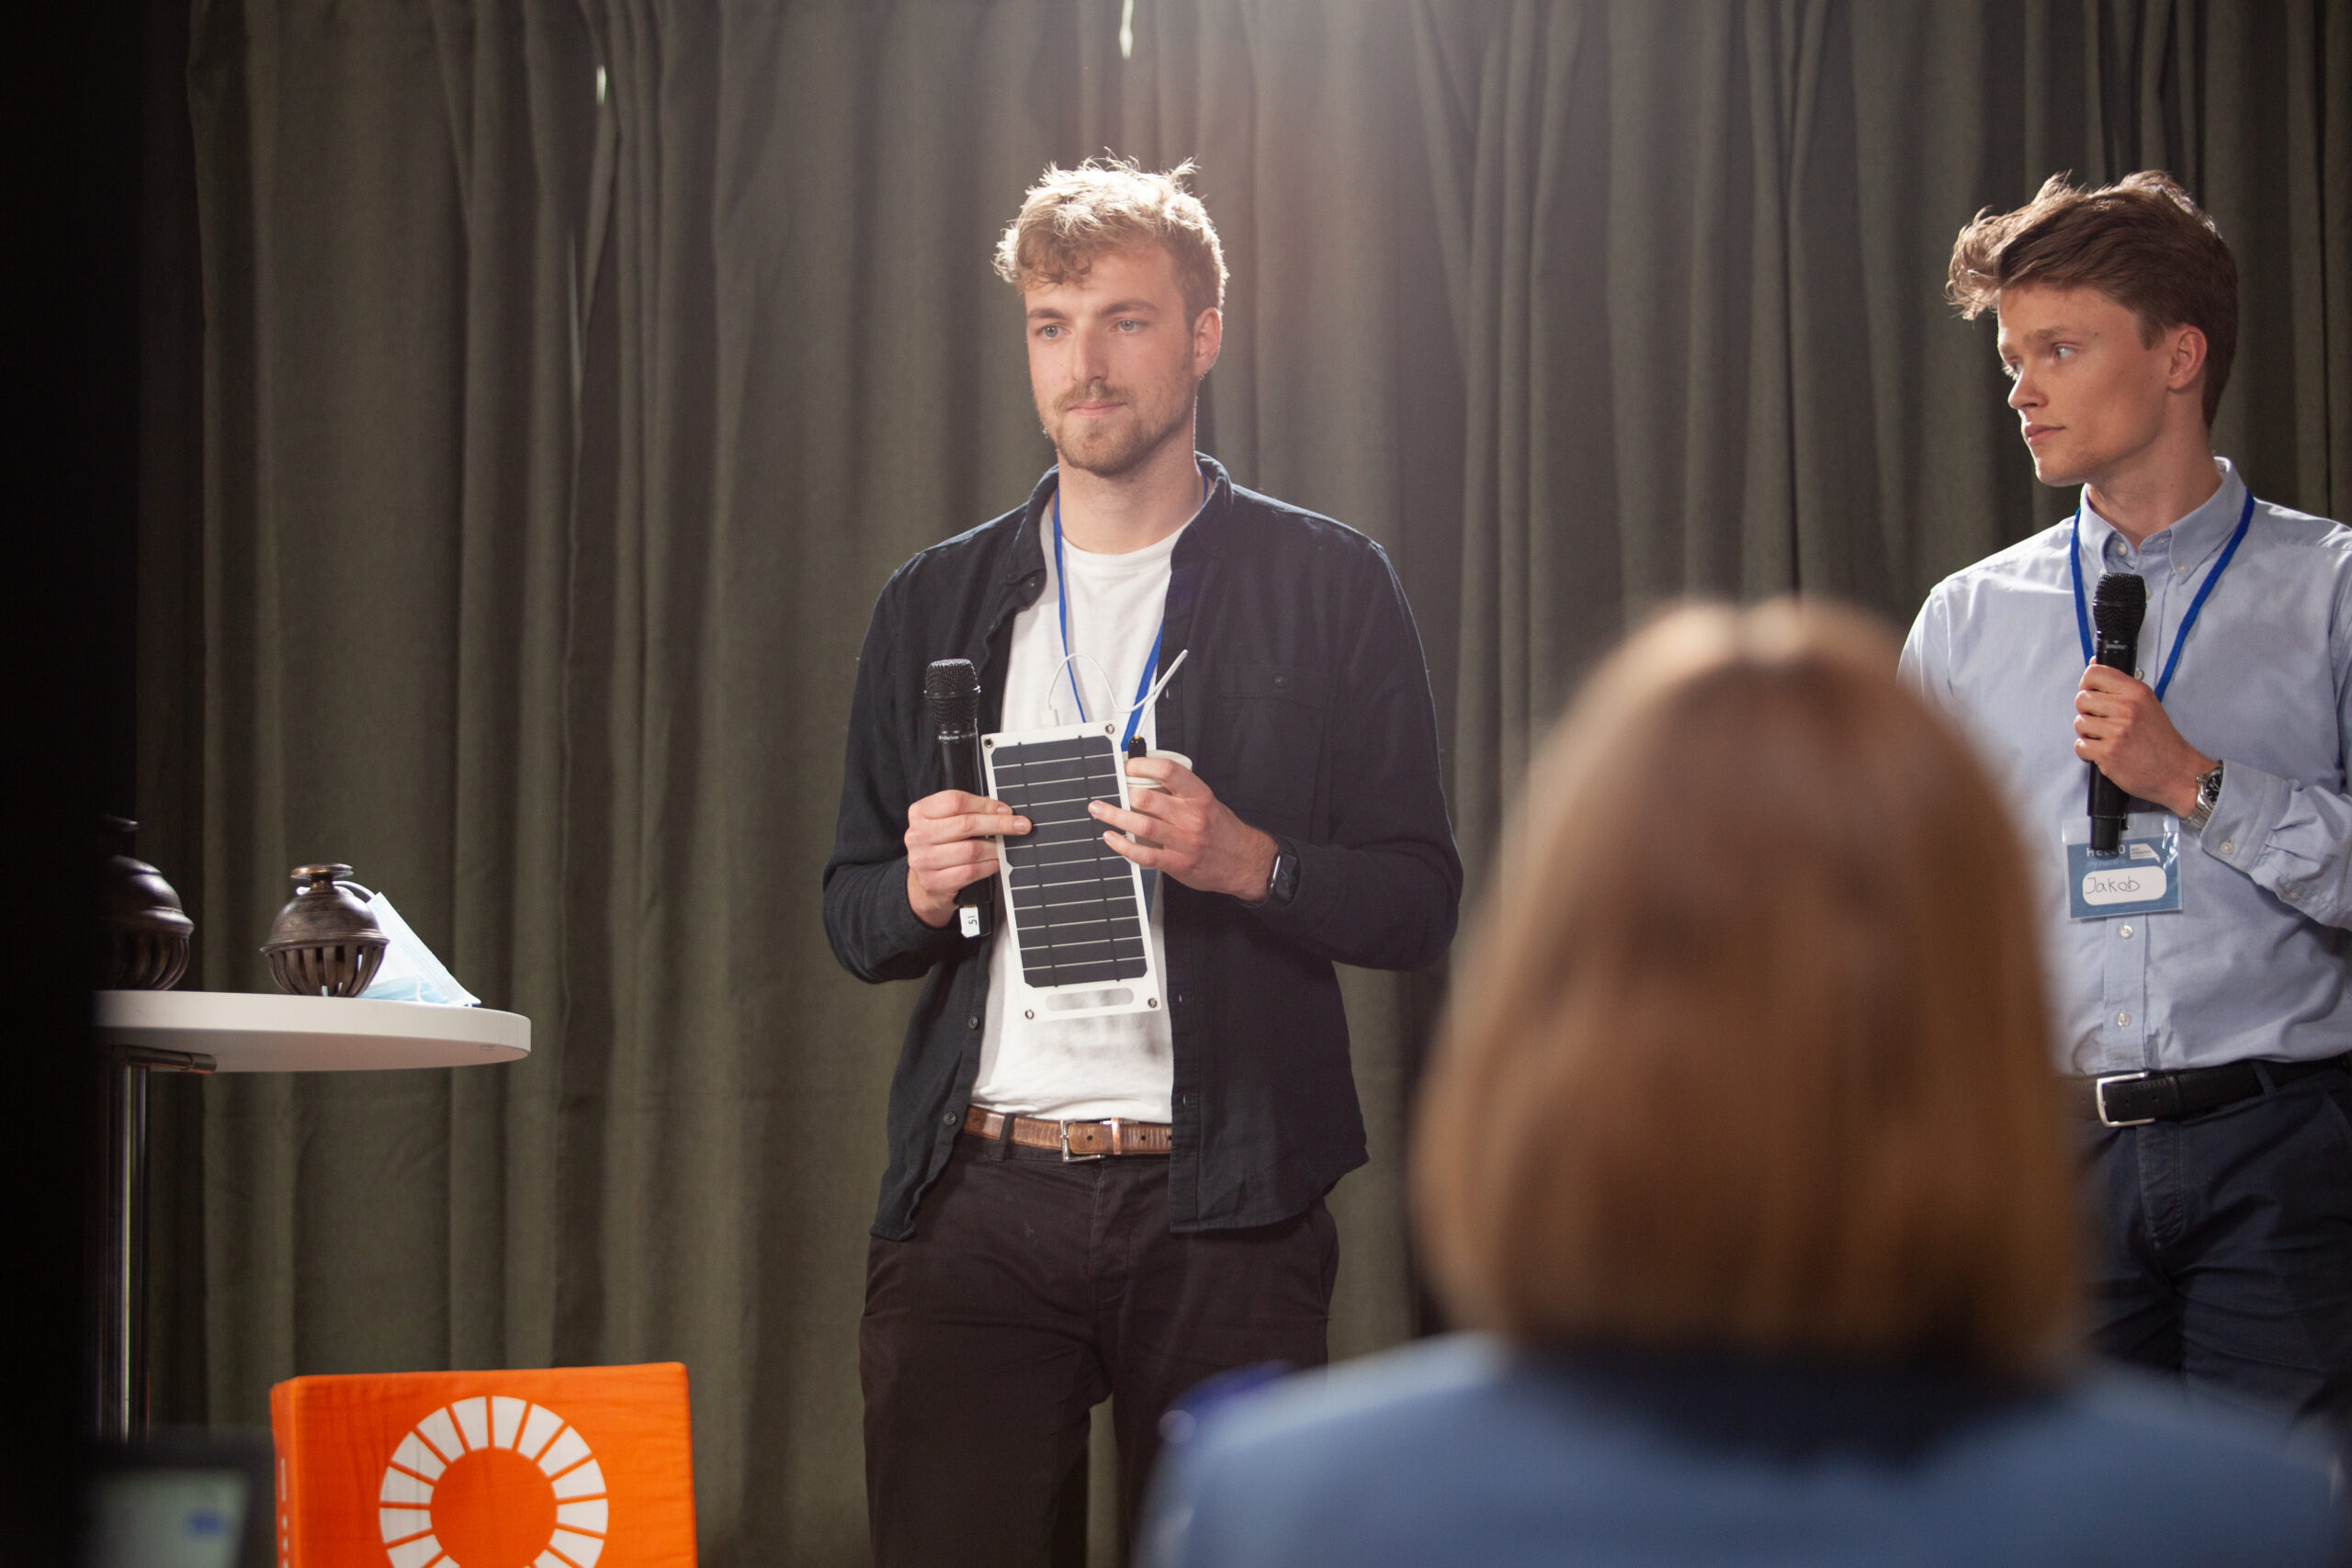 Two Male students pitching their bold idea on stage. One is holding a part of a prototype, the other a microphone